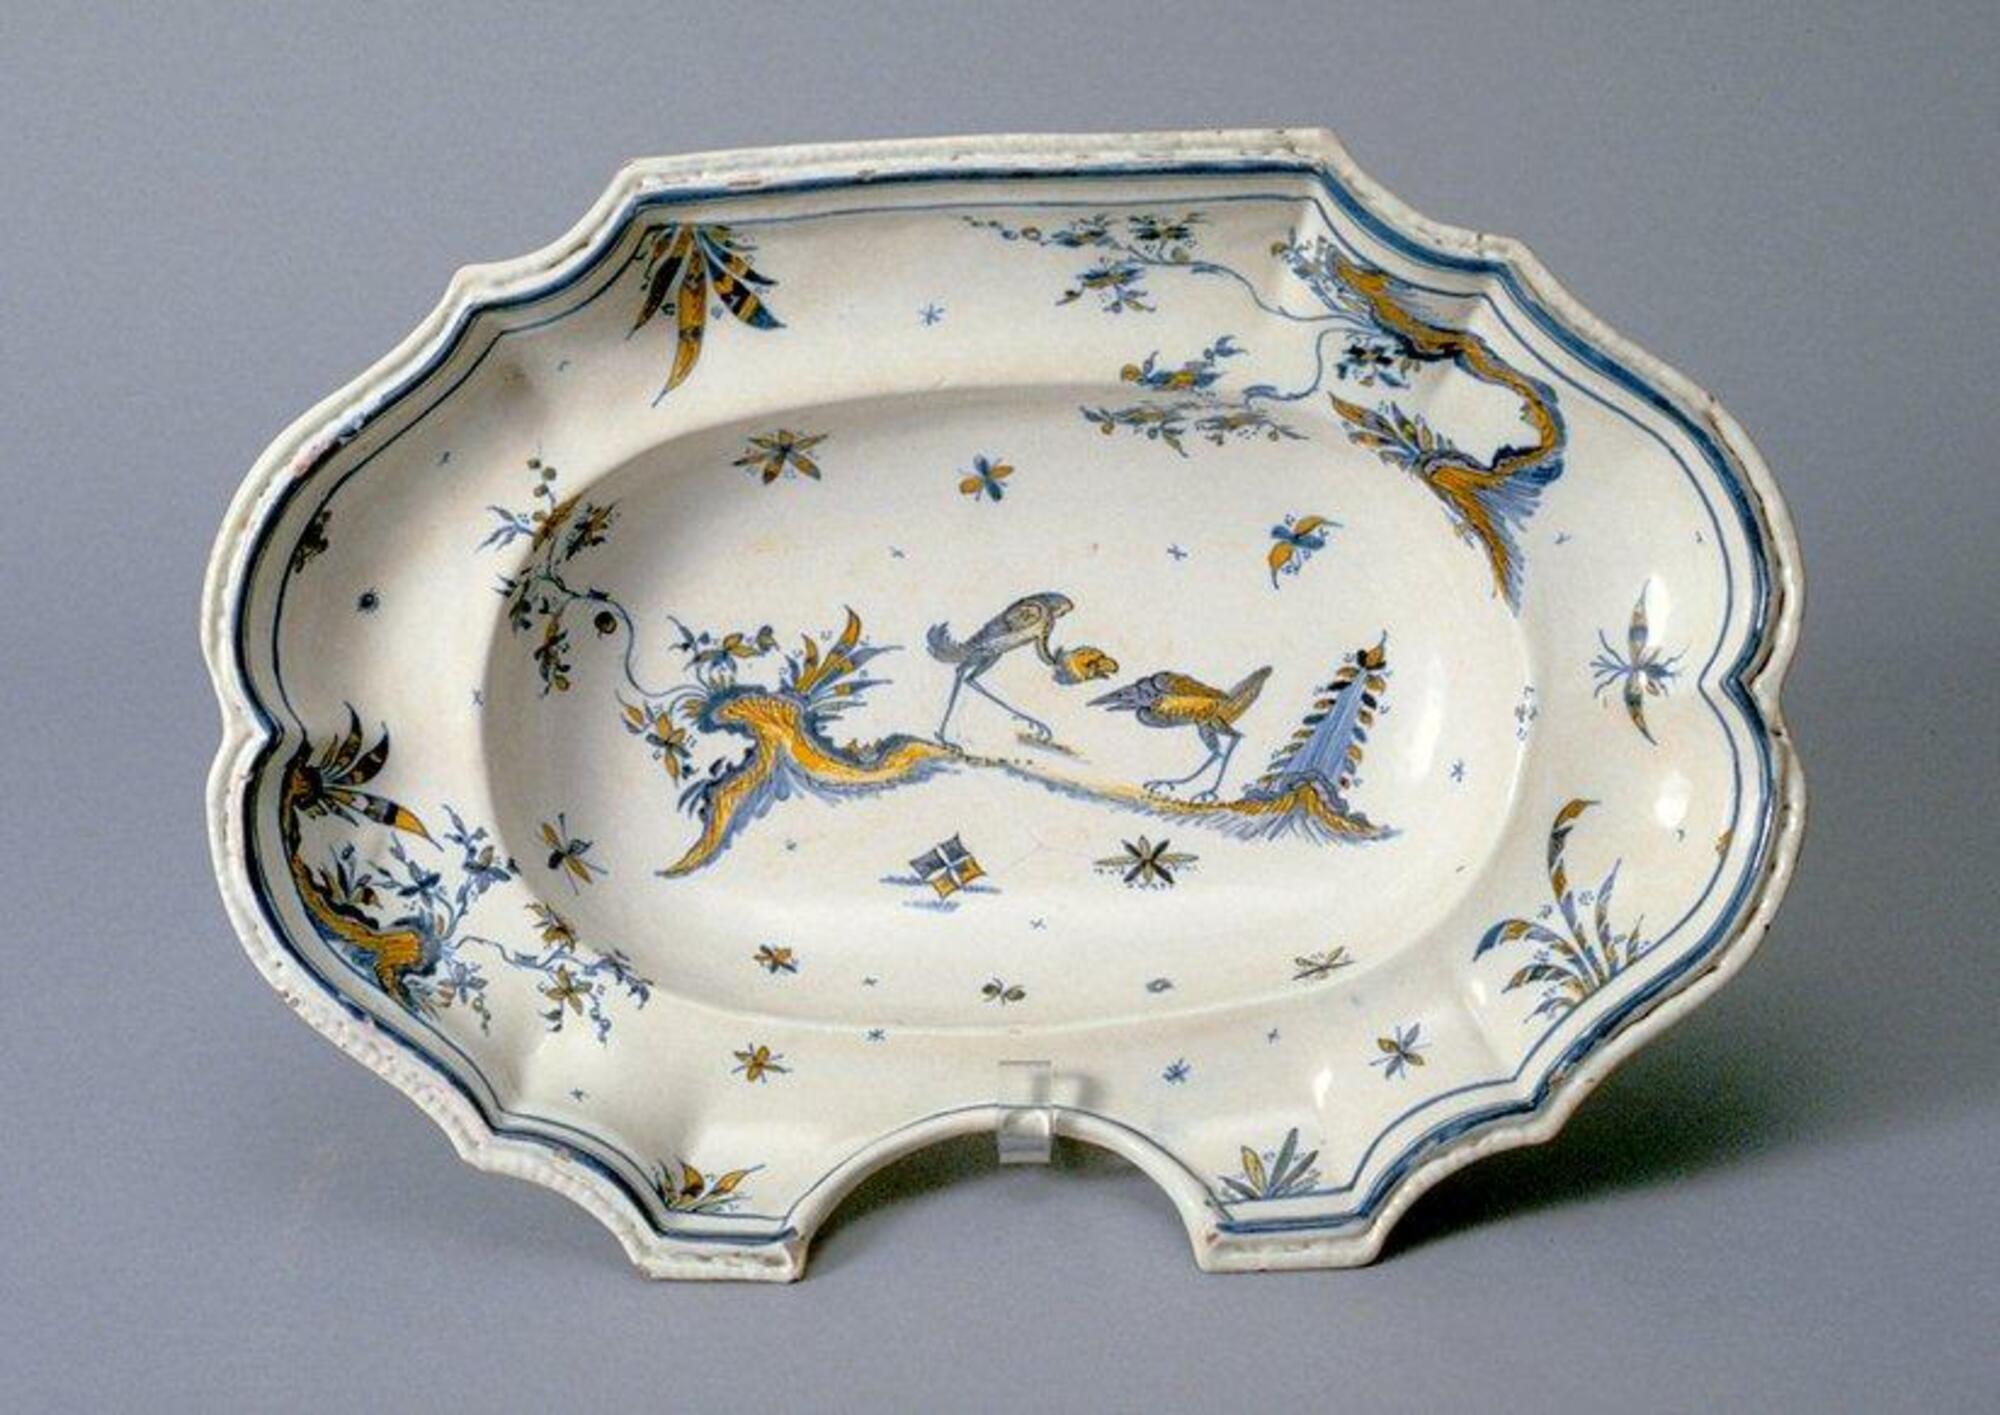 This oval-shaped ceramic vessel features a wide, steep rim surrounding a large well in the center. The scalloped edges of the rim are cut back into a deep semicircle on one side. The rim is painted in underglaze blue and yellow with plant and floral motifs that are arranged in a whimsical, asymmetrical fashion around the edge. The well is decorated with similar vegetal motifs and two vaguely stork-like birds with long legs that confront one another on a strip of turf.